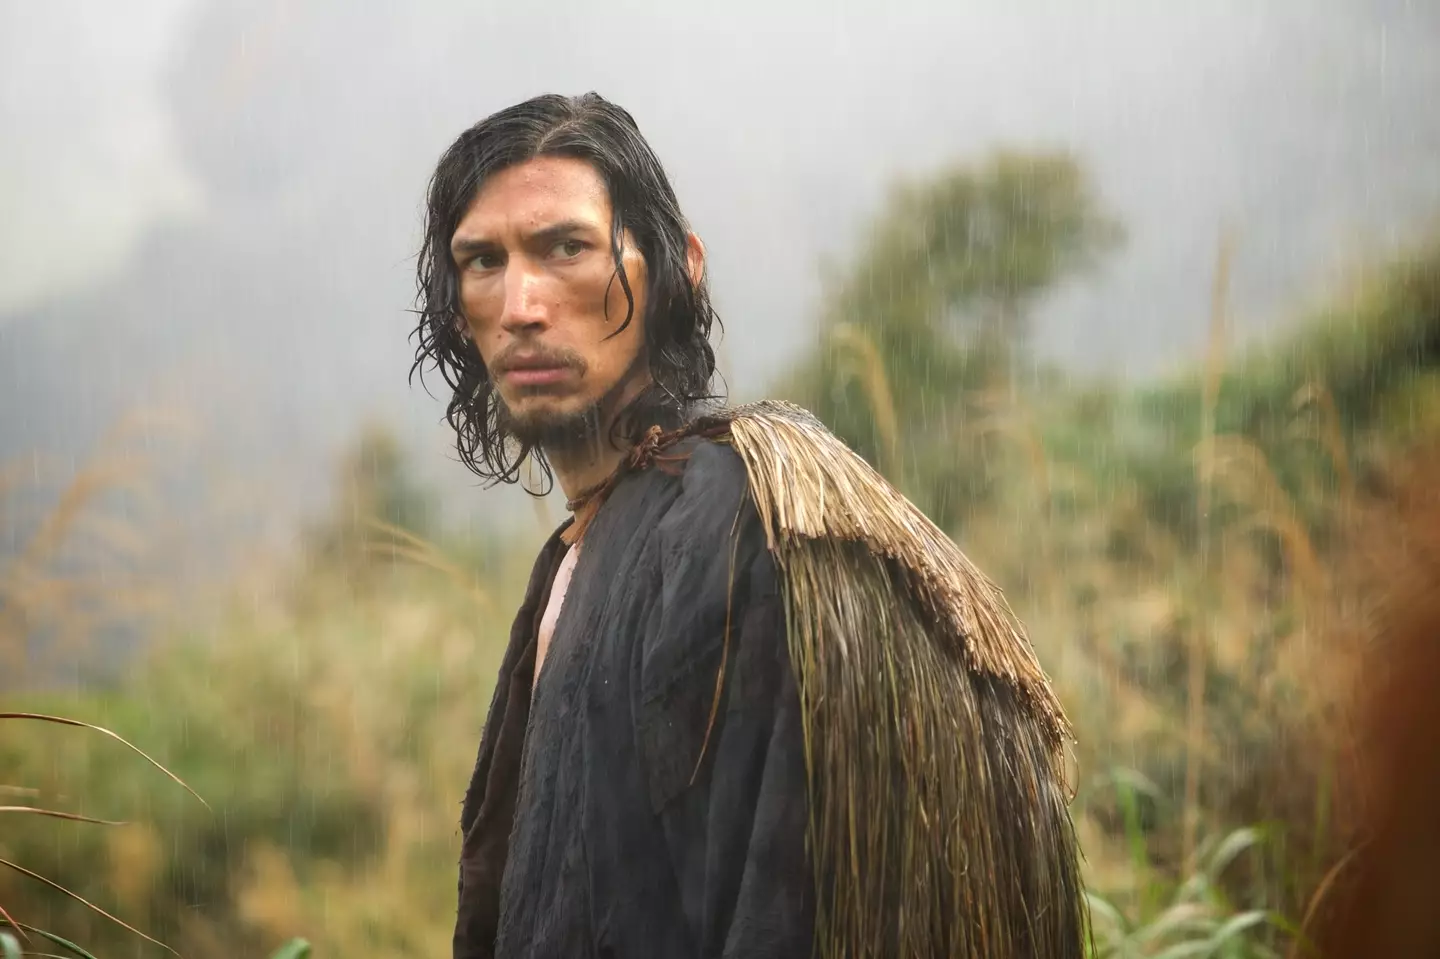 Adam Driver went to 'extreme' lengths for his role in Silence.